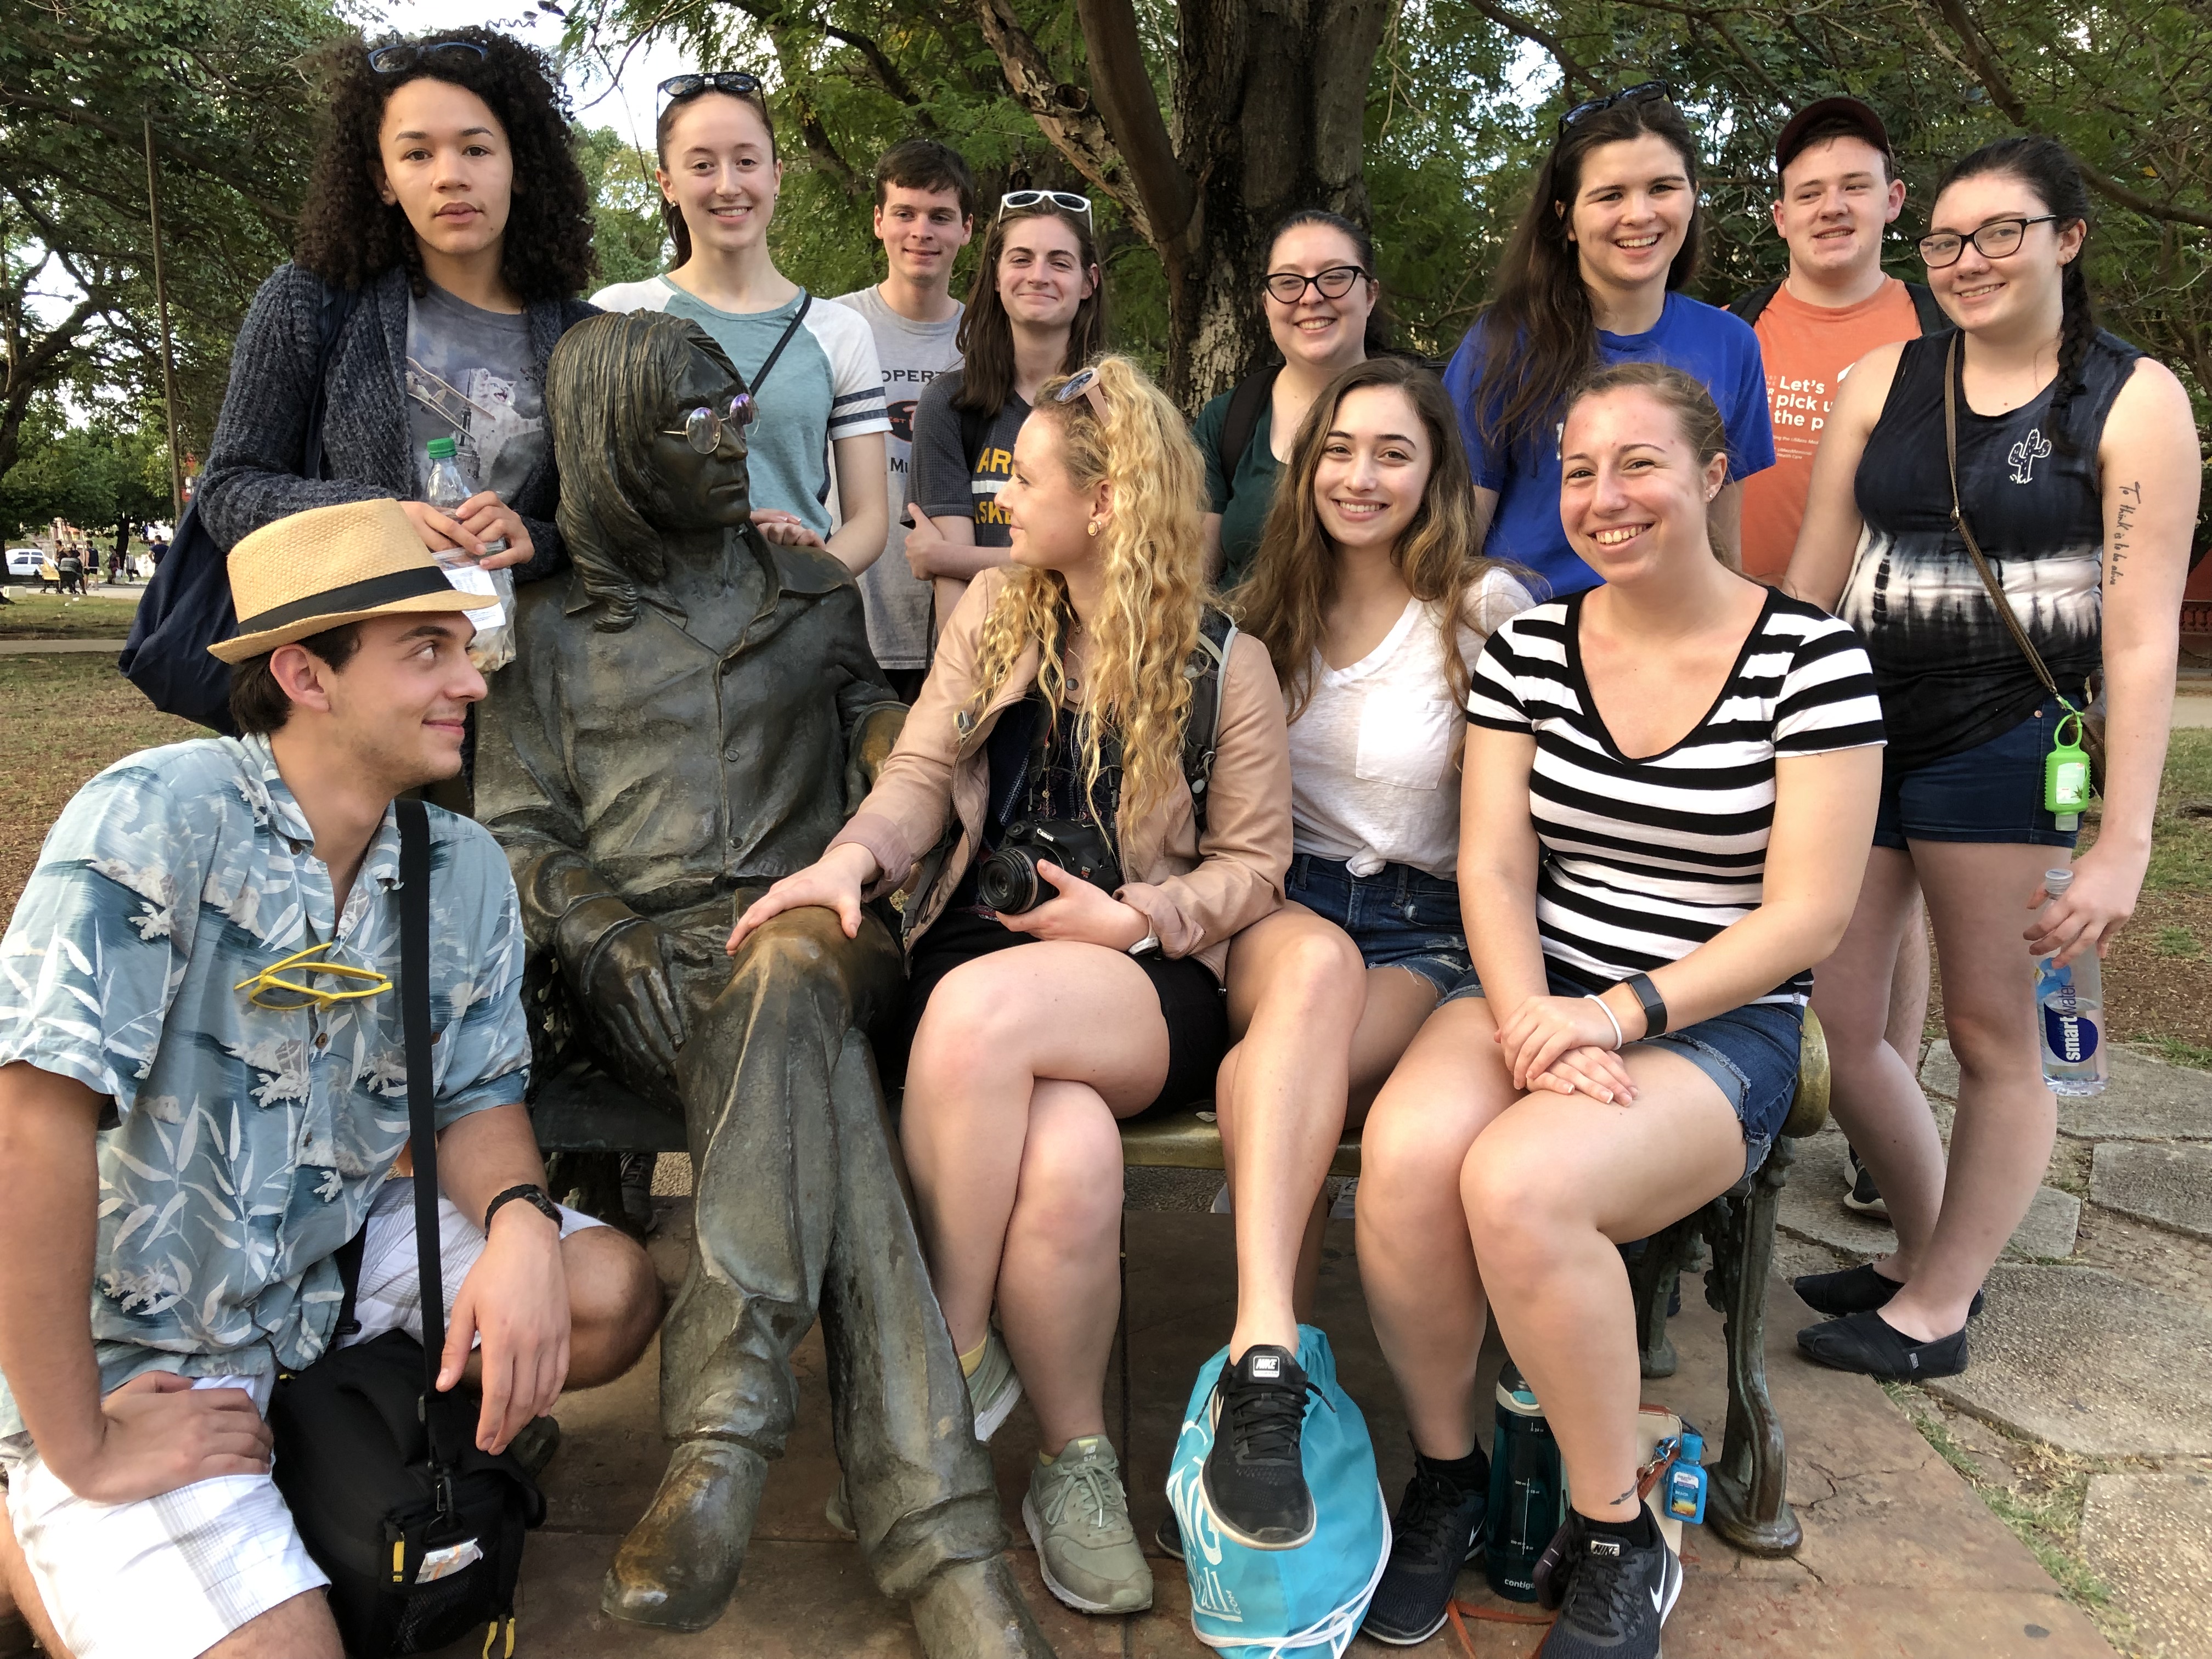 Honors students sit around a statue of John Lennon in John Lennon Park in the neighborhood of Vedado.